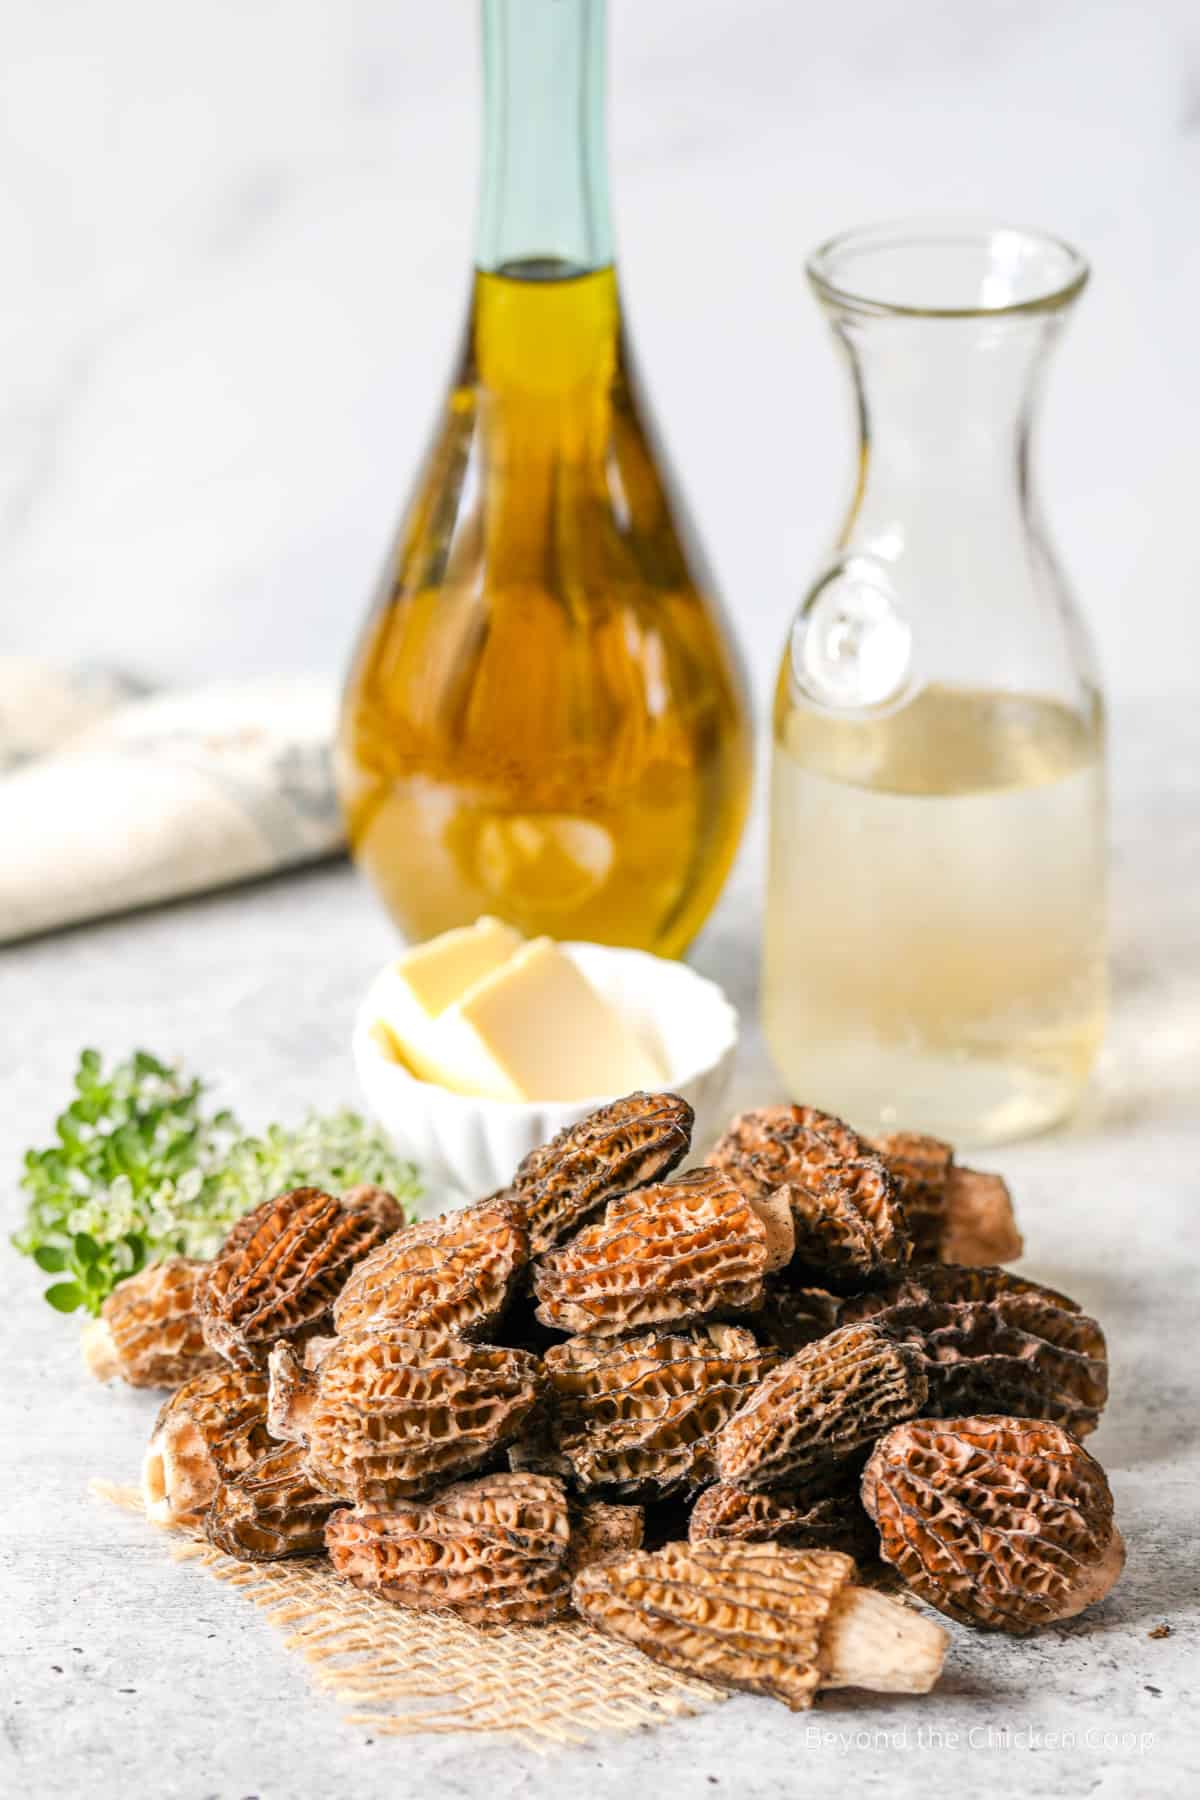 Morel mushrooms, butter, fresh herbs, wine and olive oil.